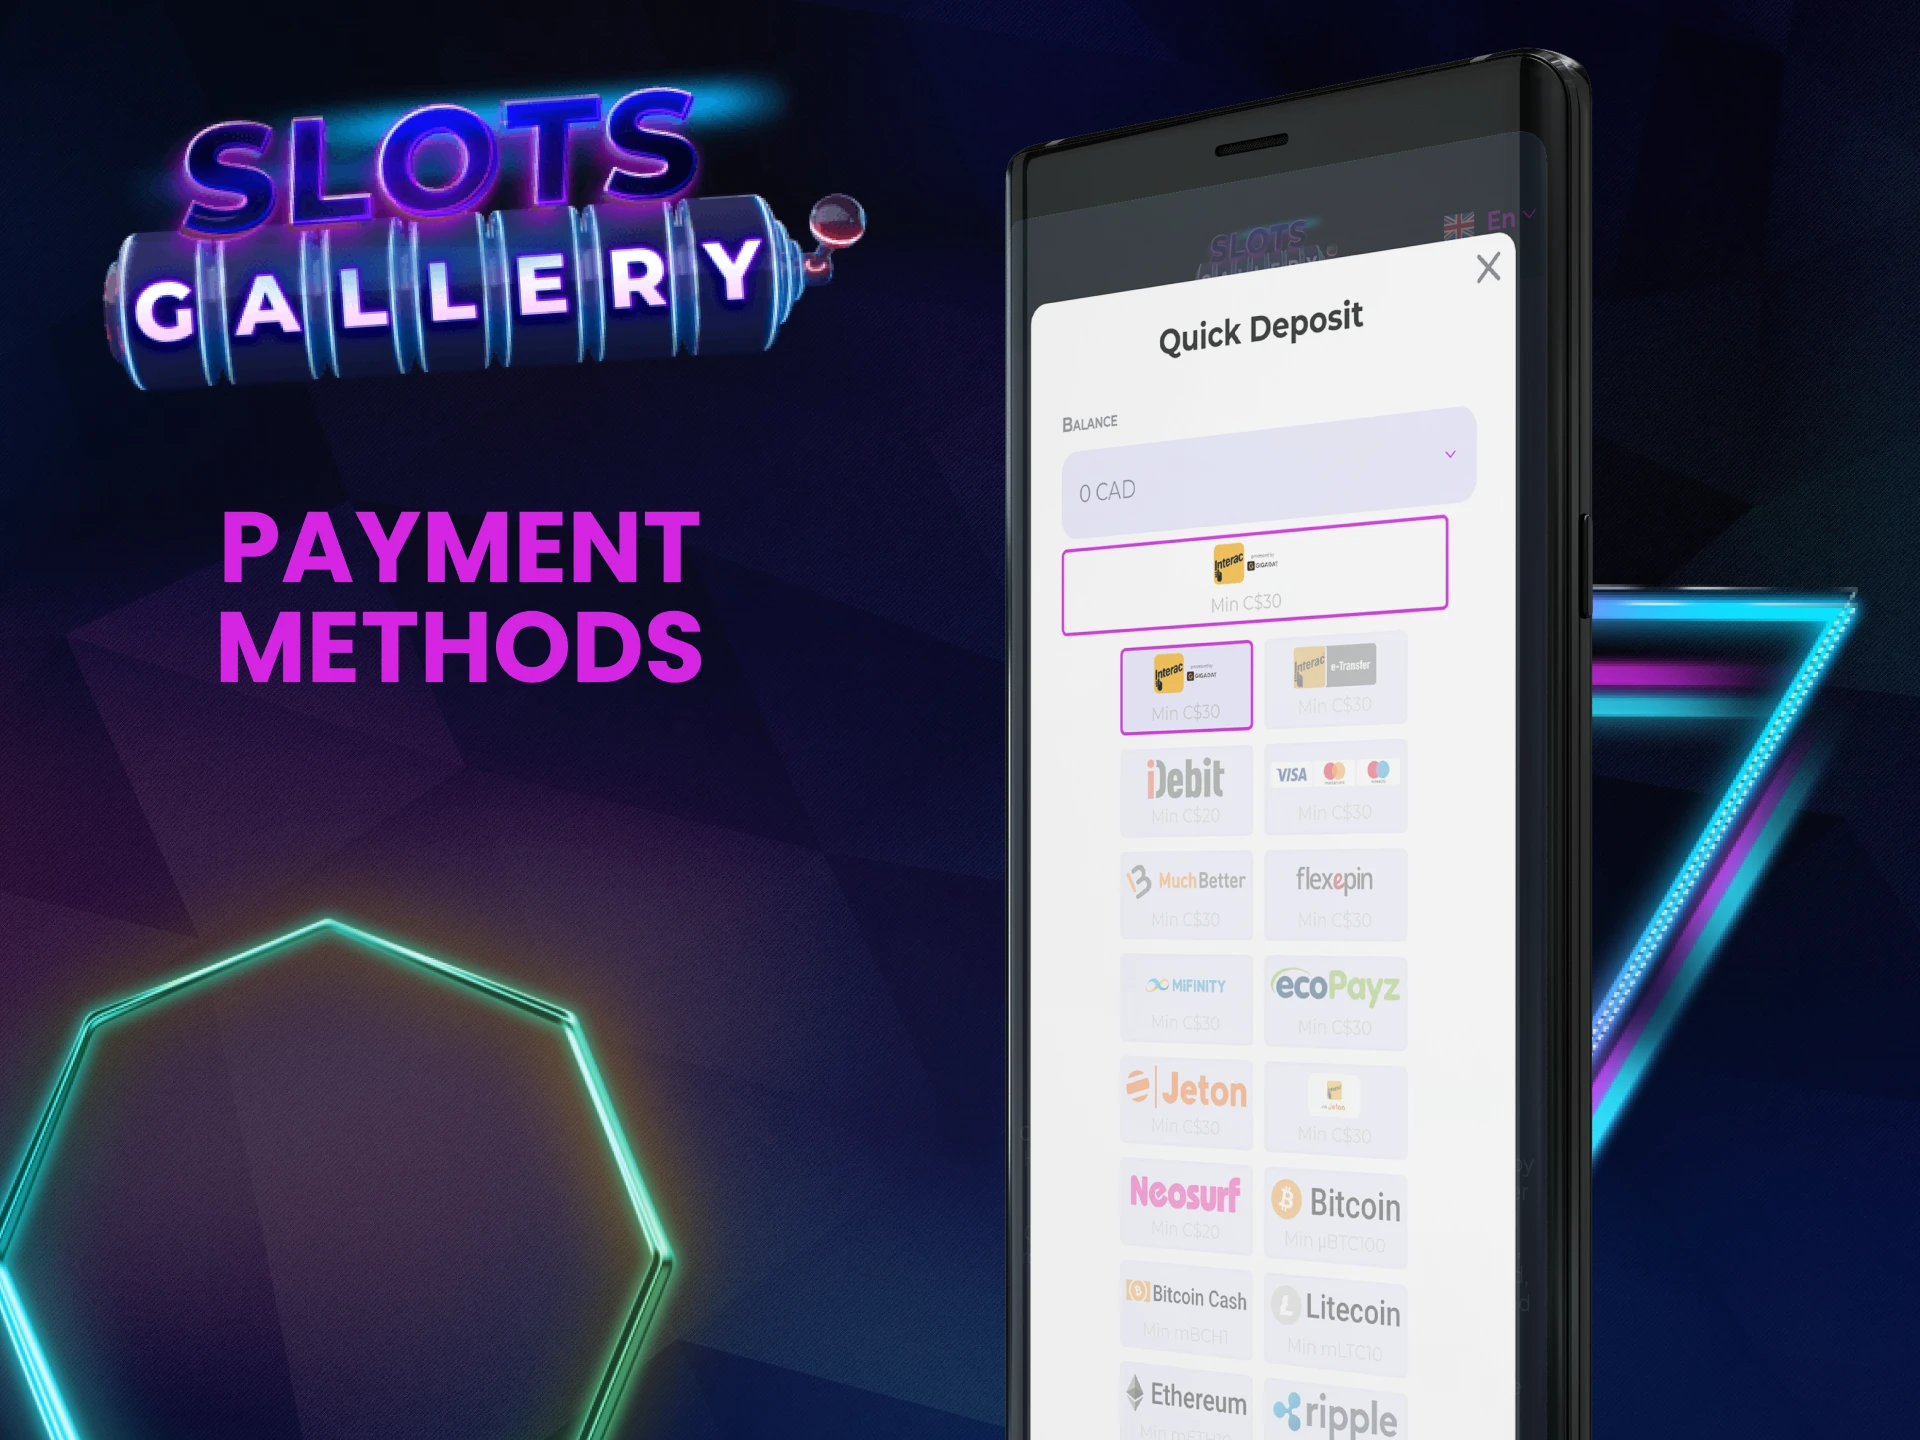 We will tell you about the transaction methods in the Slots Gallery app.